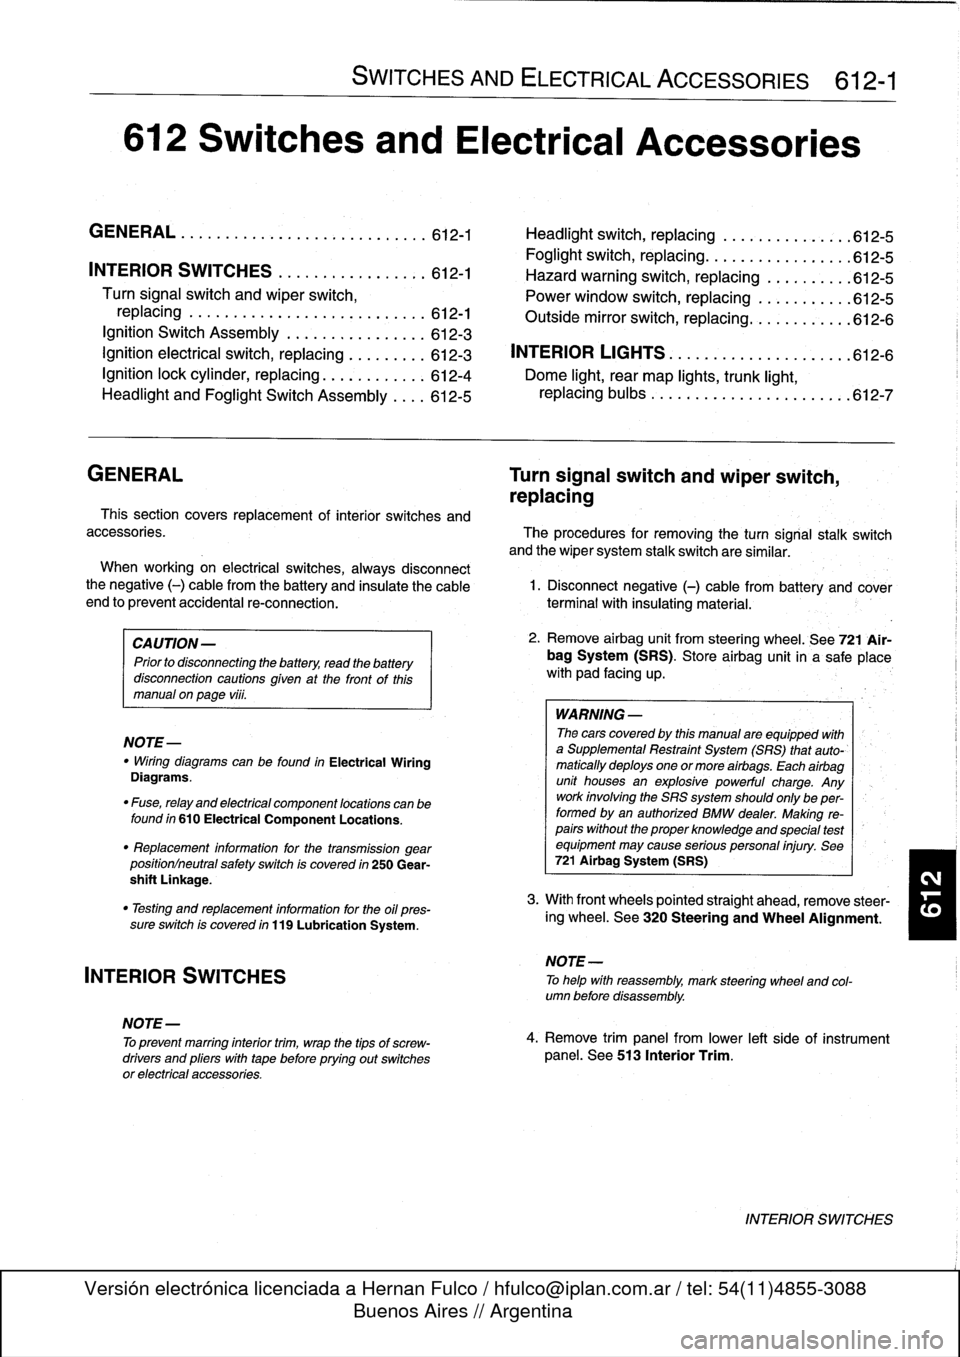 BMW 318i 1998 E36 Workshop Manual 
612
Switches
and
Electrical
Accessories

GENERAL
.
.
.
.
.
.
.
.
.
...
.
.
.
.
.
...
.
......
.612-1

	

Headlight
switch,
replacing

	

..
.
...
.
.
.
.
.
.
.
.
.
612-5

Foglight
switch,
replacing
.